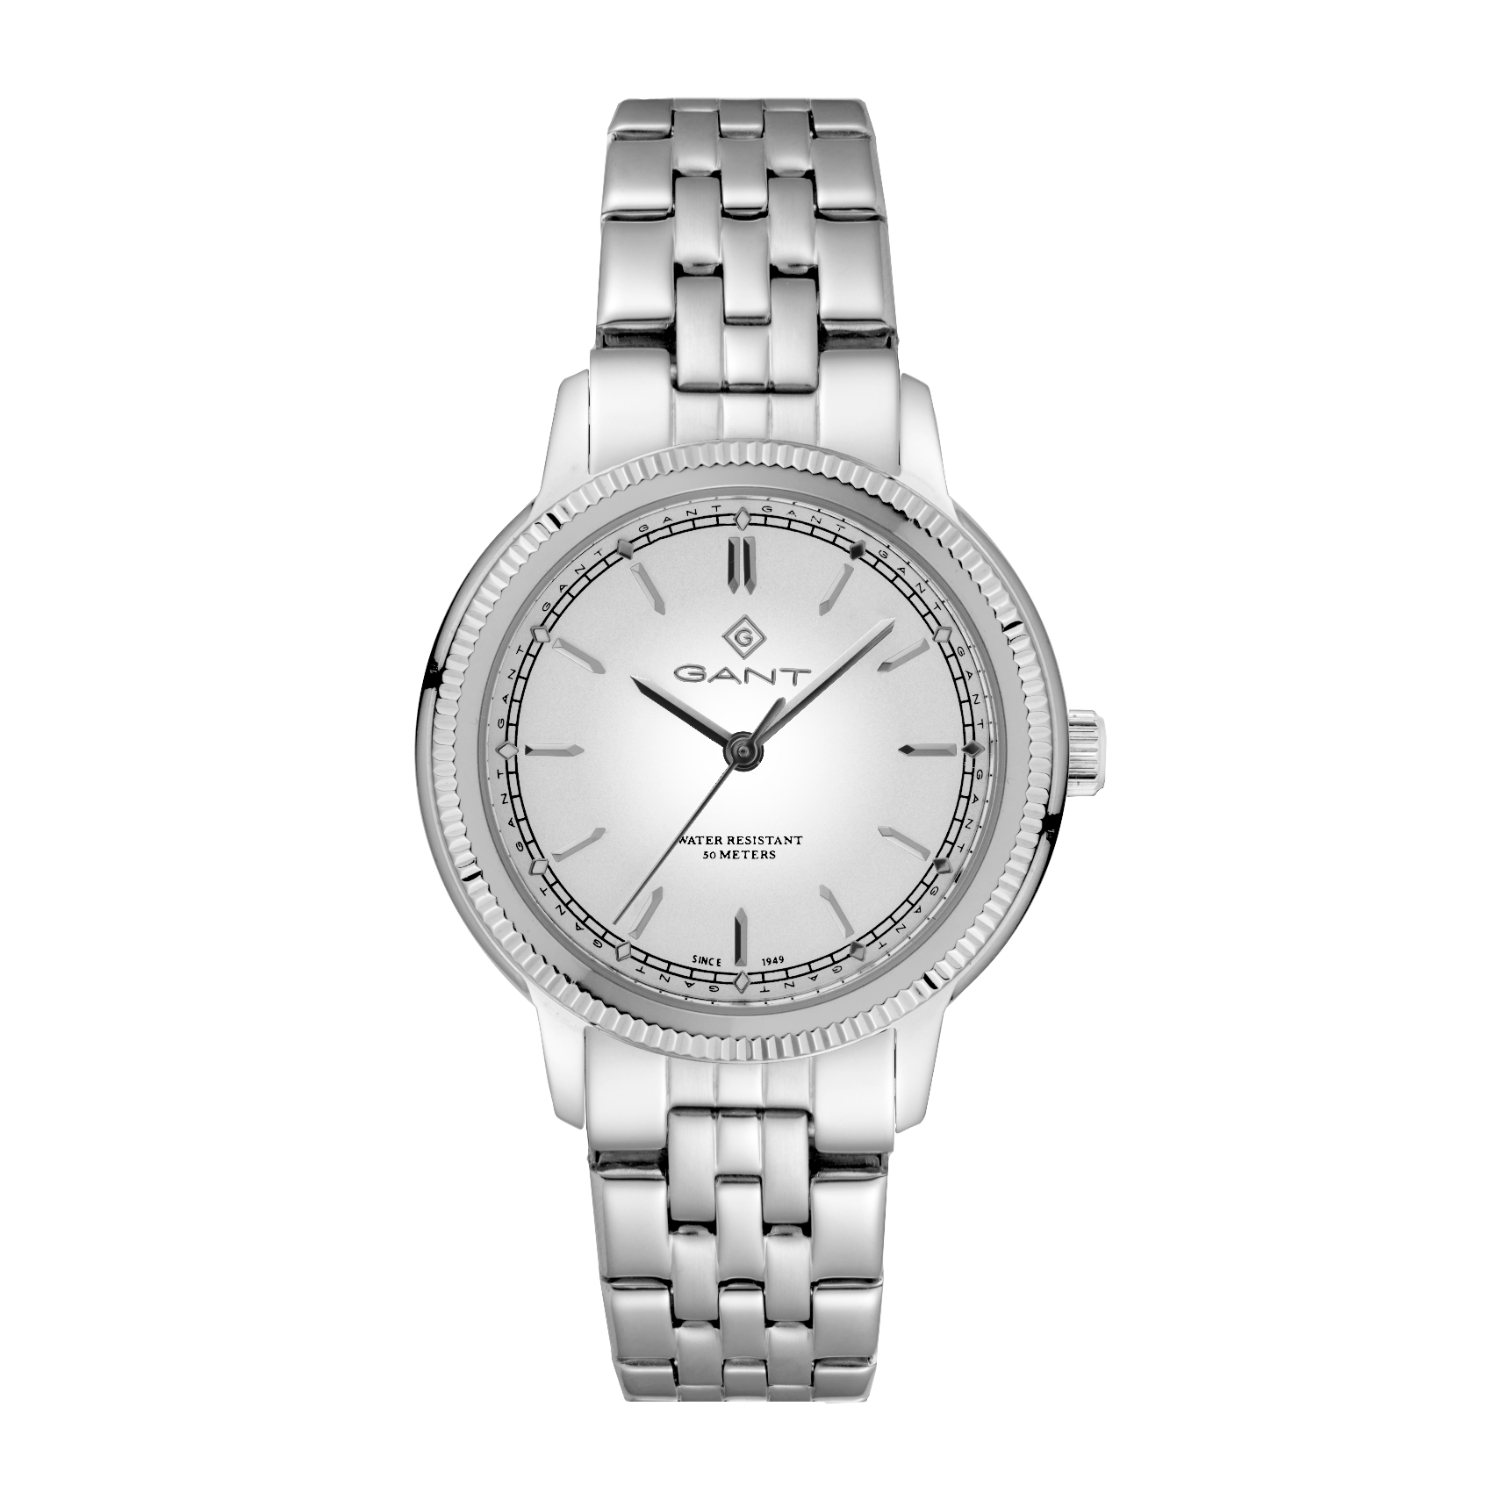 GANT womens watch in silver stainless steel with white dial and bracelet.	